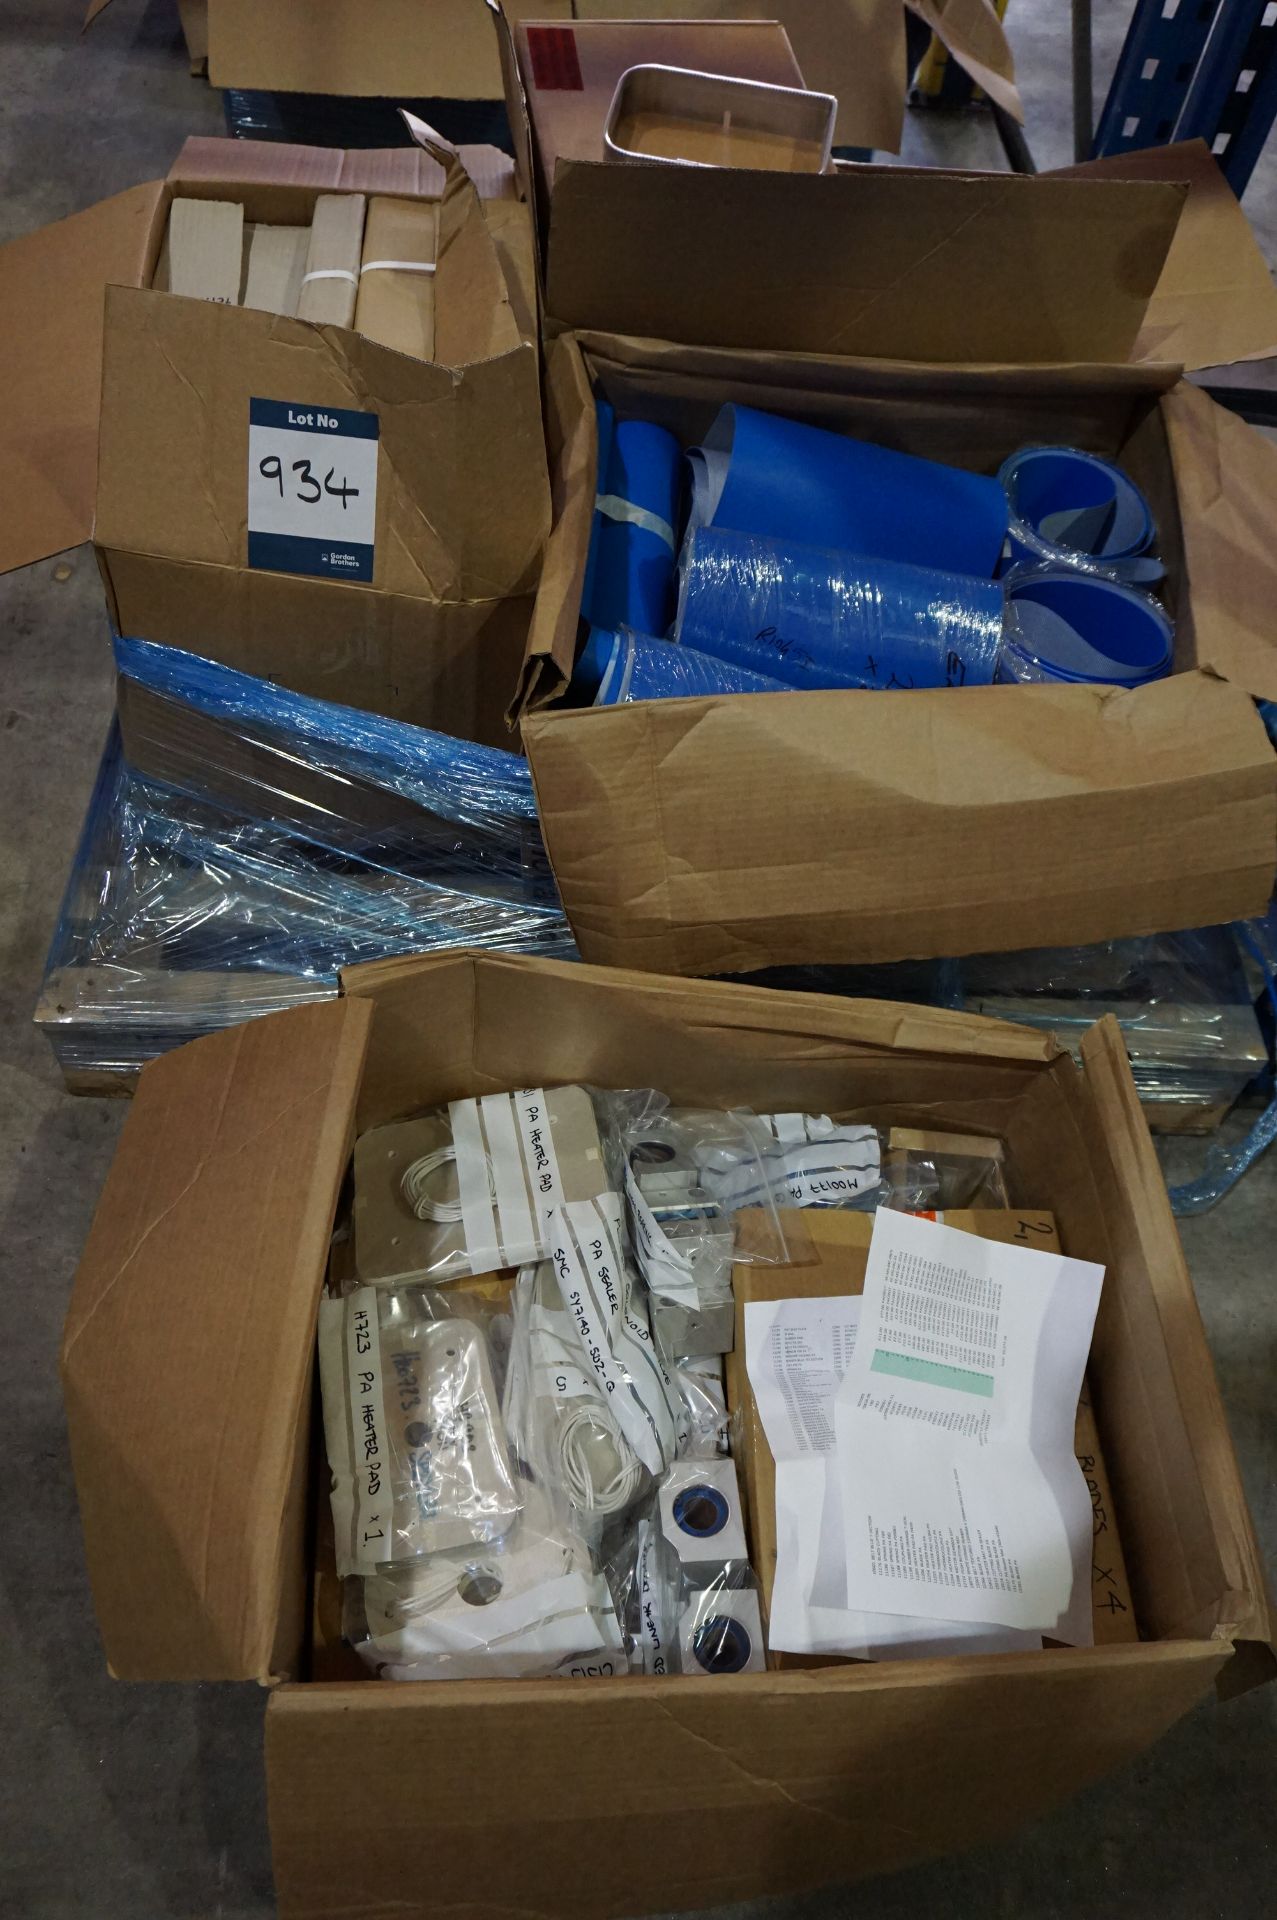 4 x Boxes of PA Sealer parts to include: belts, springs, thermocouplers, heater pads, cutting